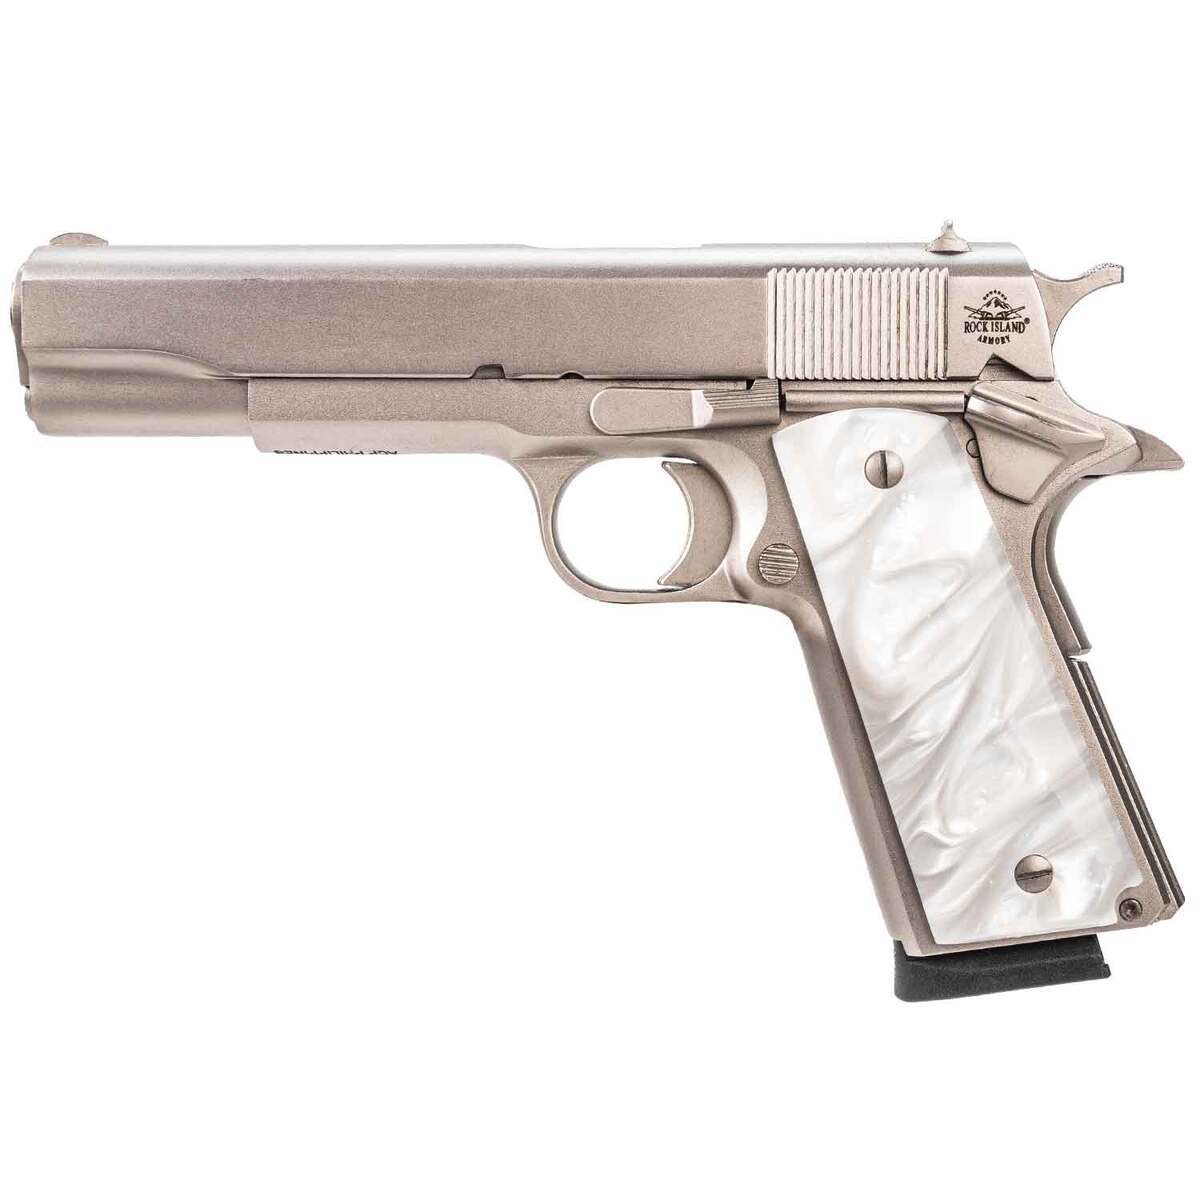 Rock Island Armory M1911 A1 Gi 45 Auto Acp 5in Matte Nickle Pistol 81 Rounds Sportsmans 7693